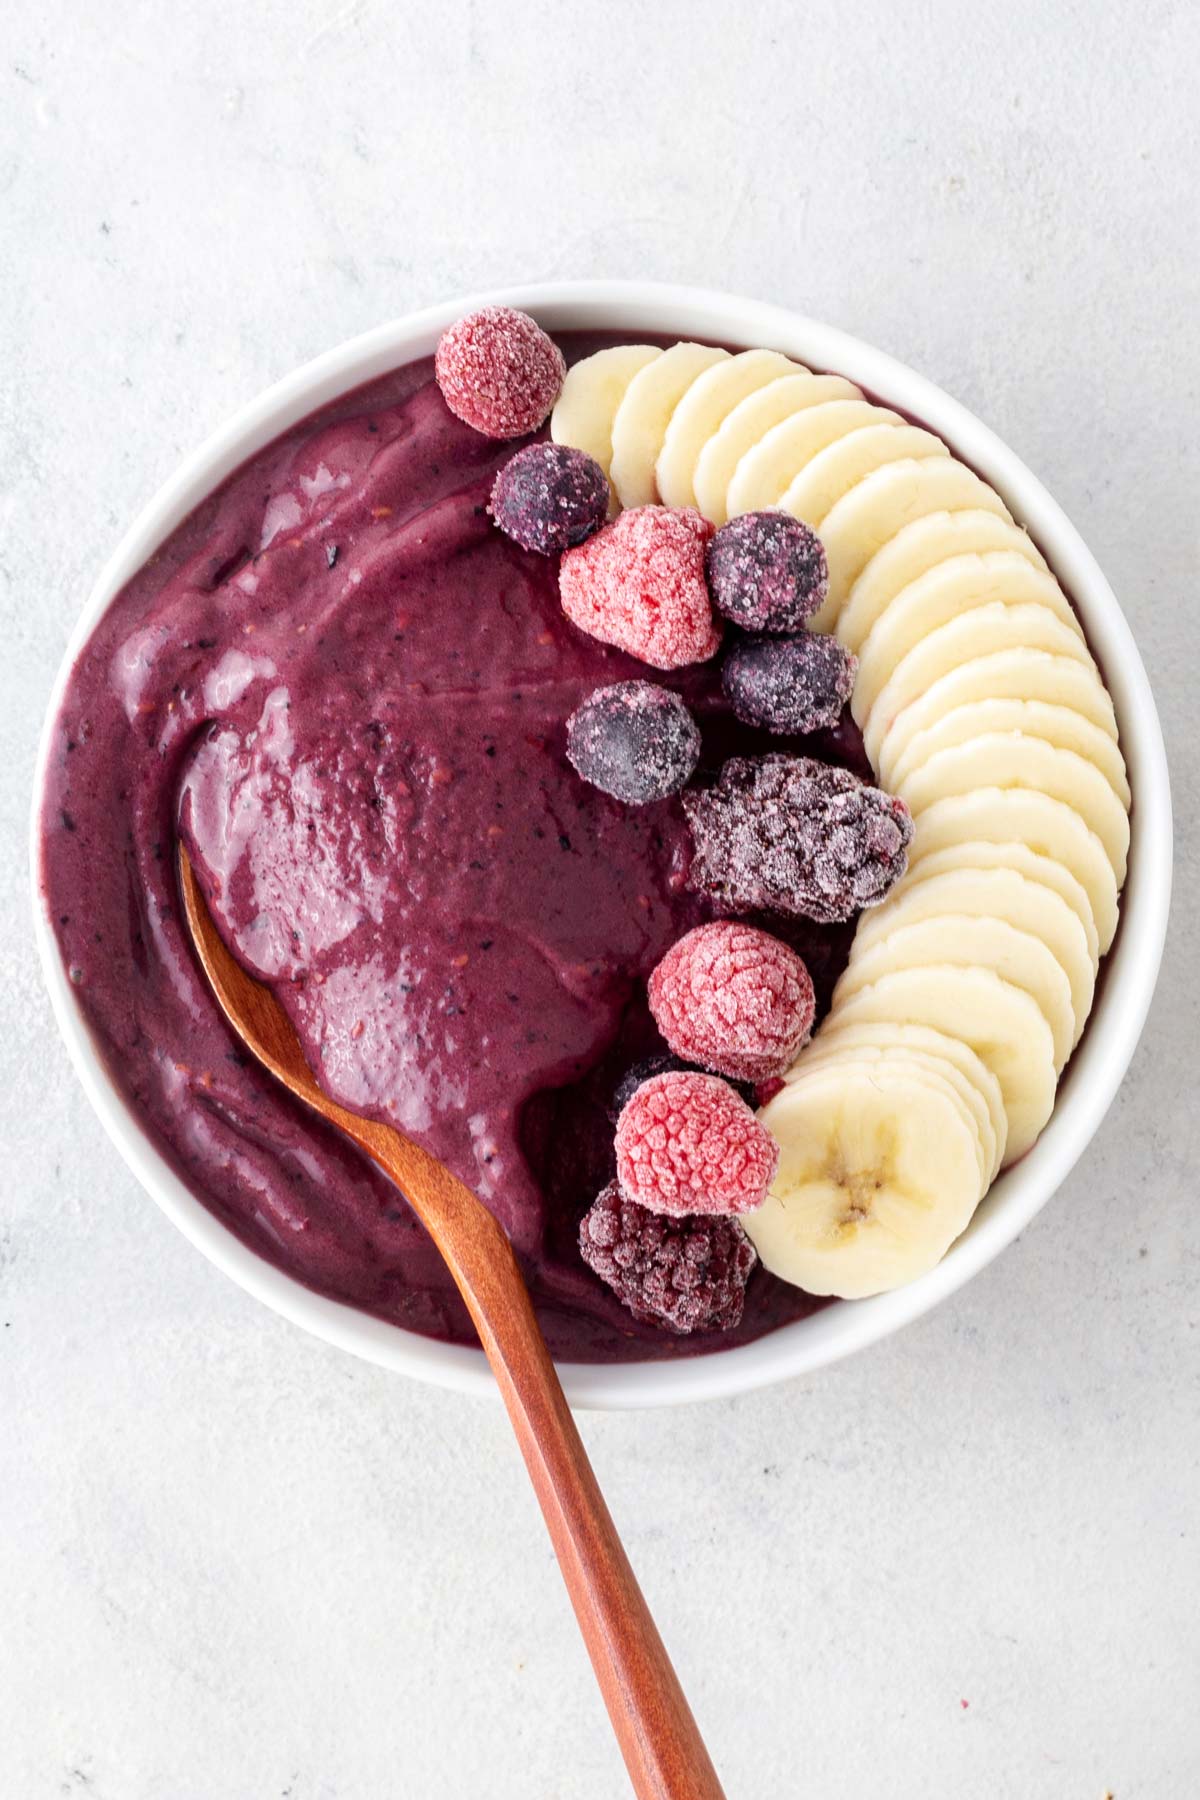 Acai smoothie bowl on a gray table.